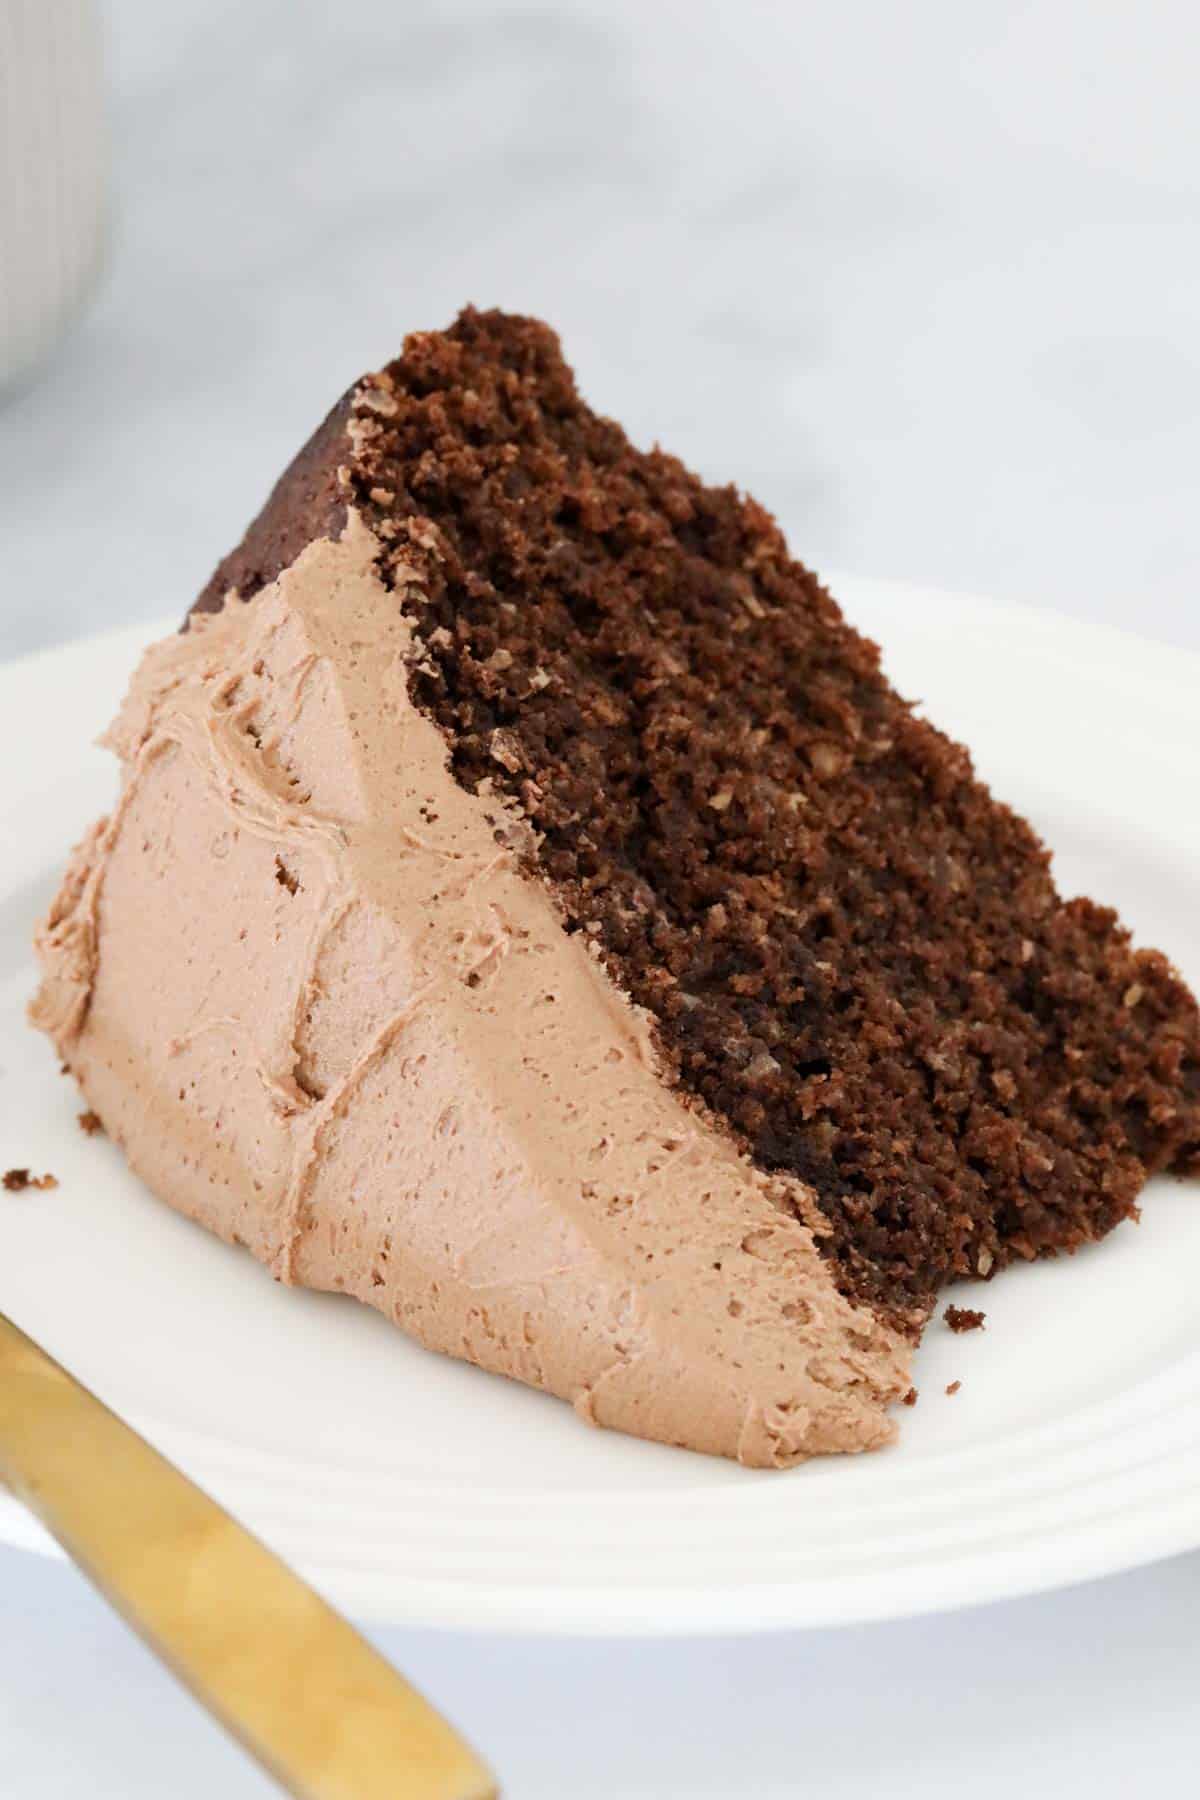 A slice of chocolate cake topped with chocolate buttercream on a white plate.